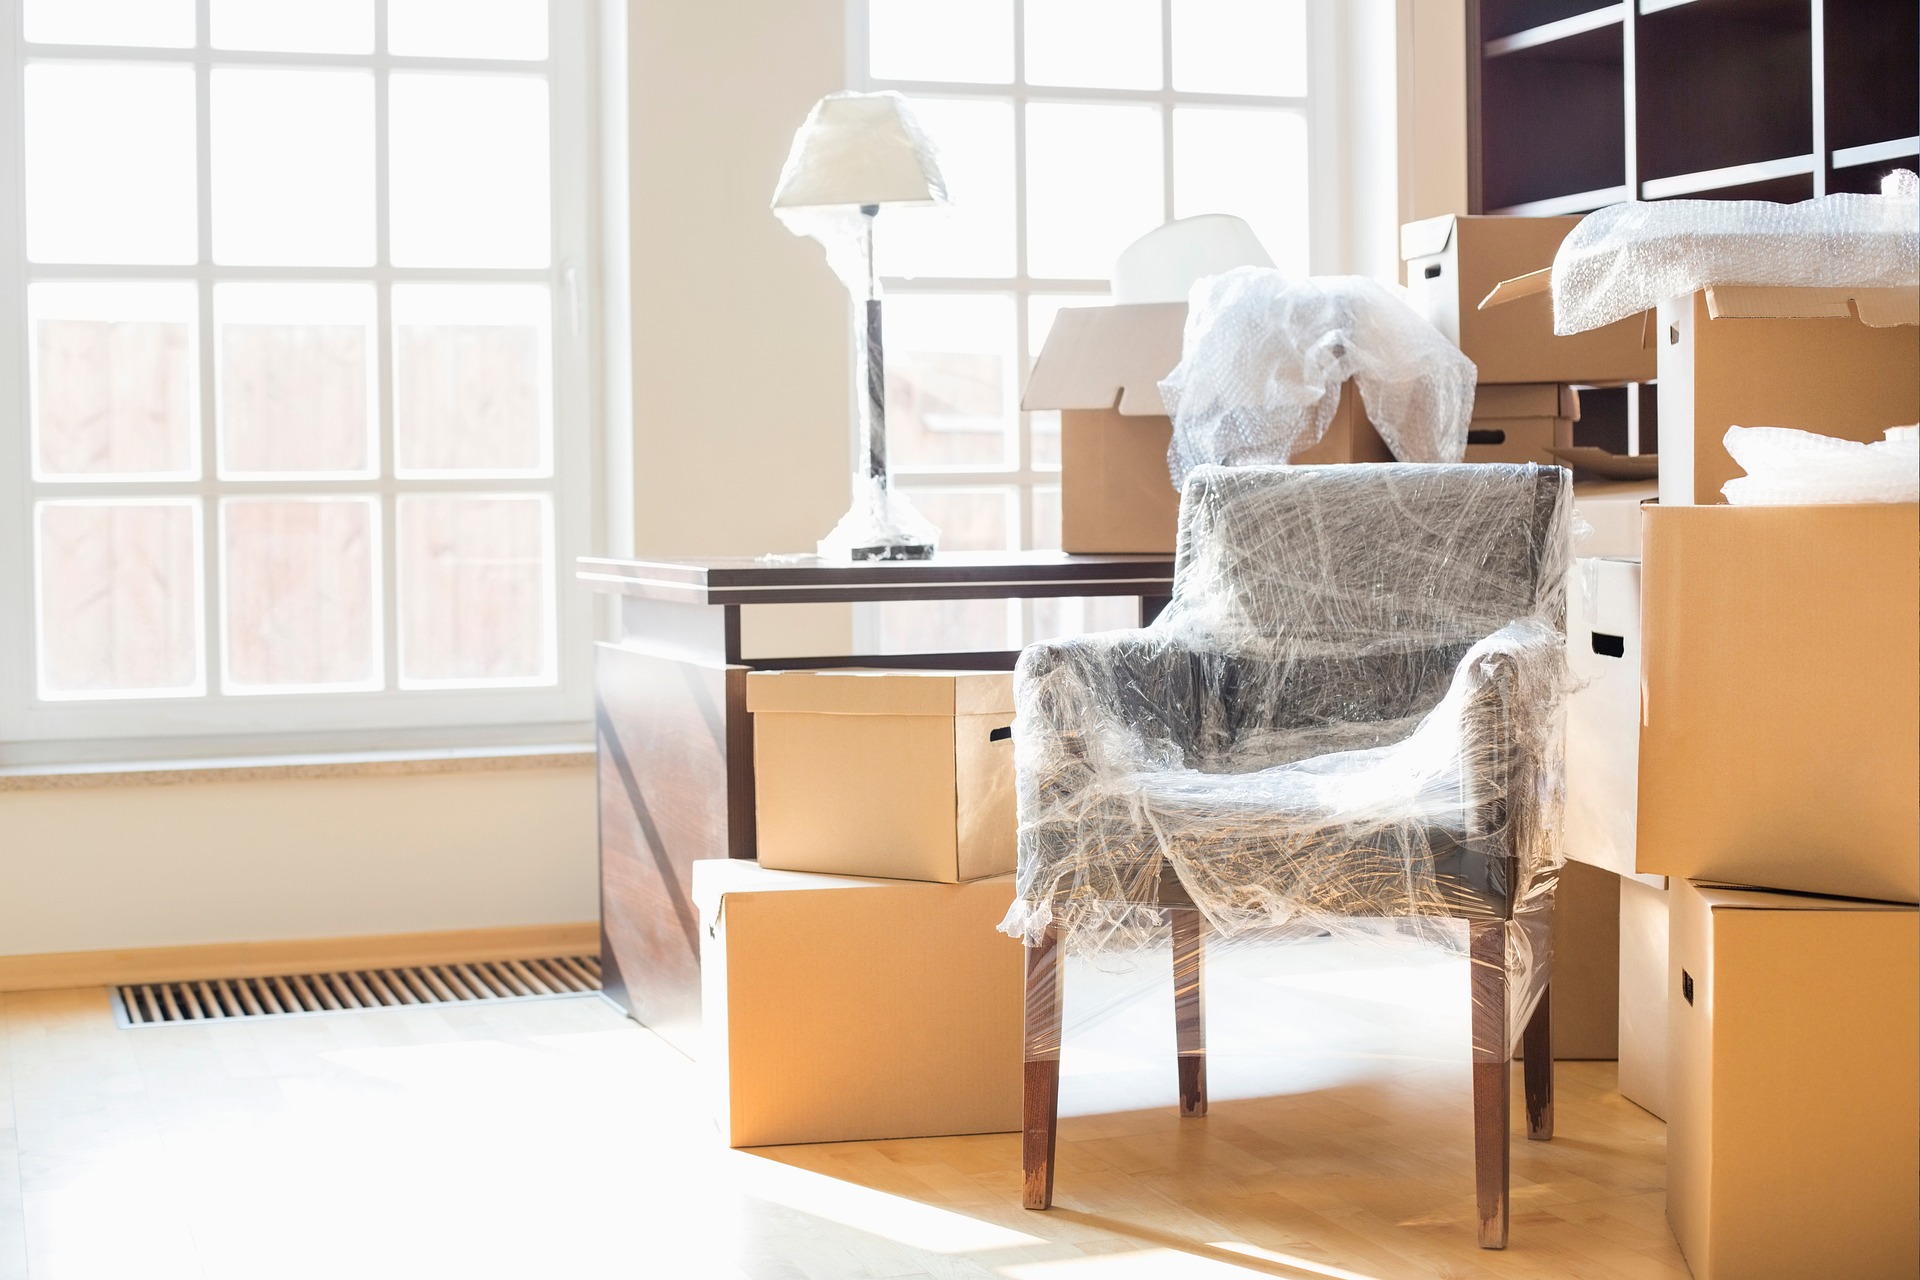 Things You Needed For a New House: A Complete Guide